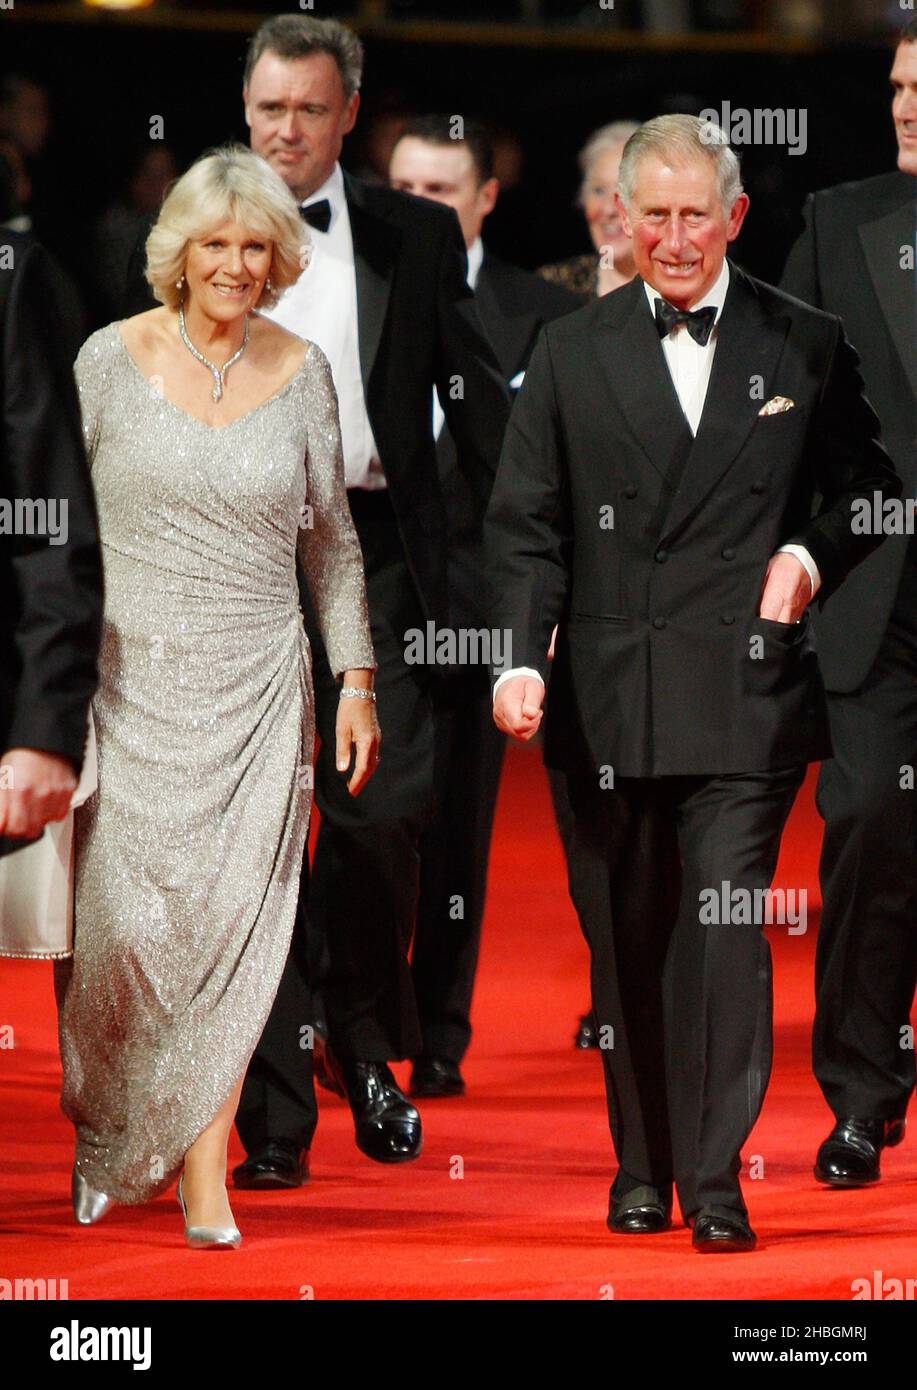 Camilla, Princess of Cornwall and Prince Charles,Prince of Wales attend The Royal Film Premiere of 'Hugo' at The Odeon, Leicester Square in London Stock Photo